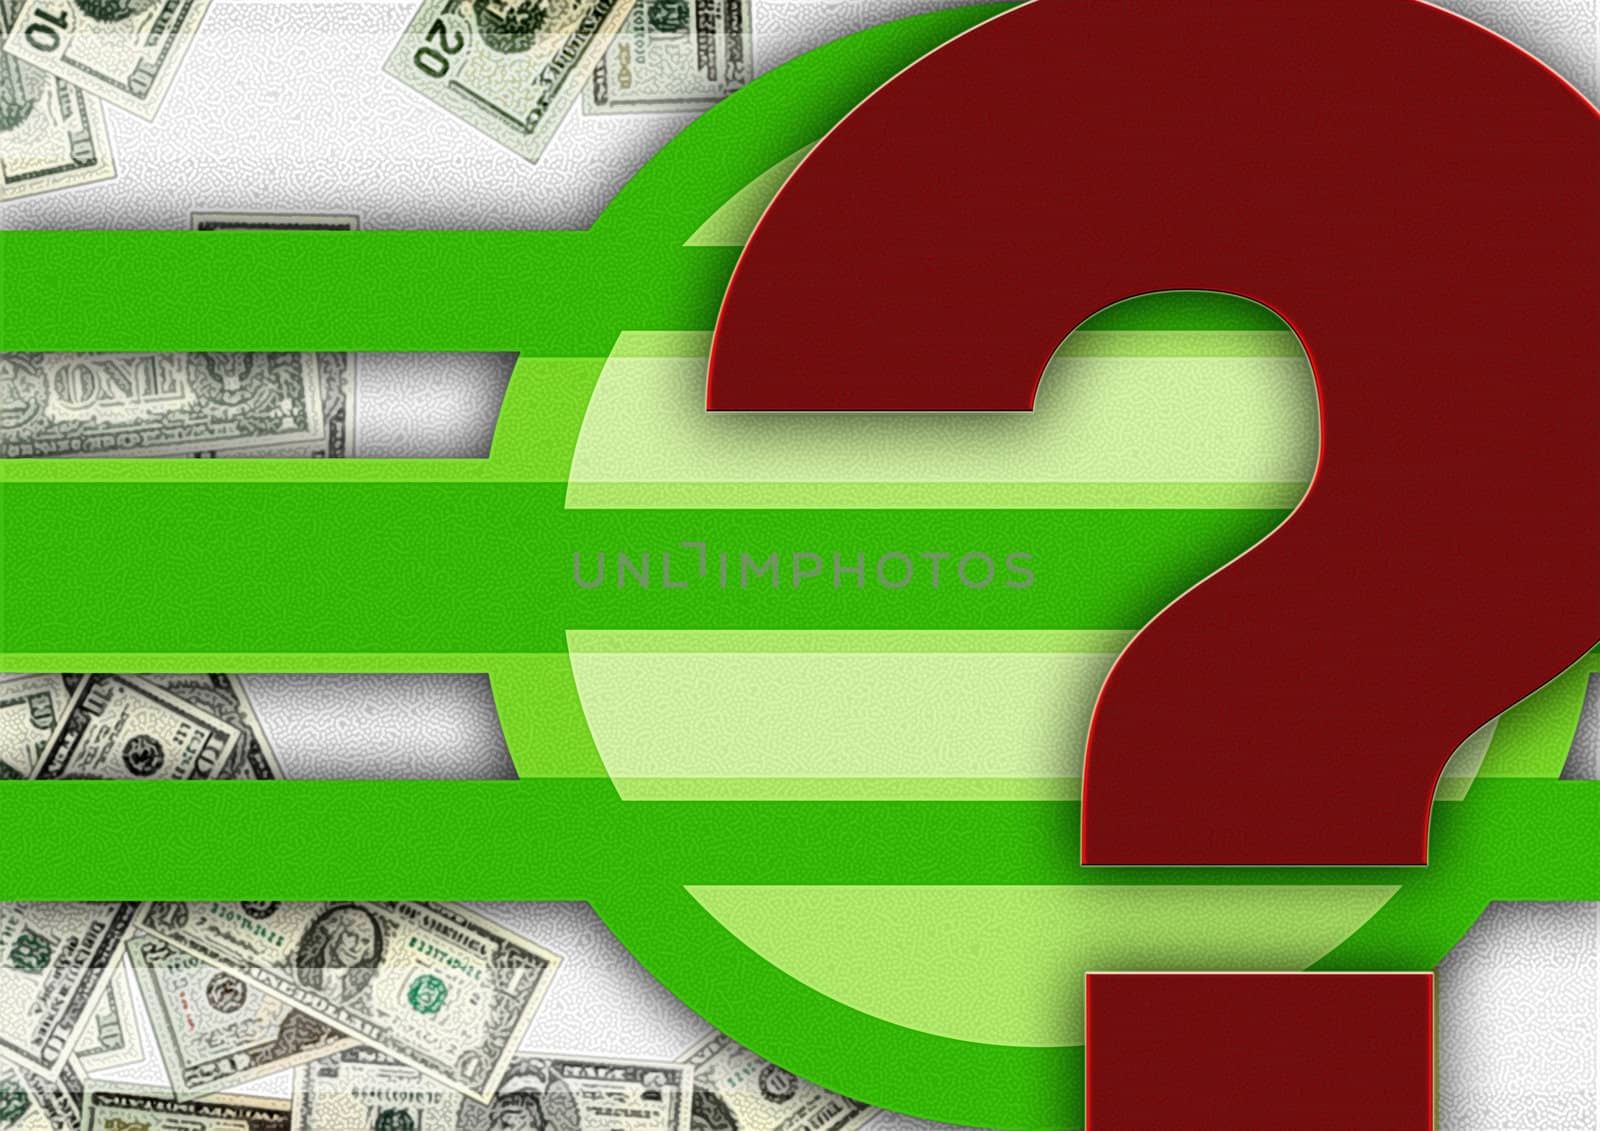 abstract creative symbolic image of the proper use of money
